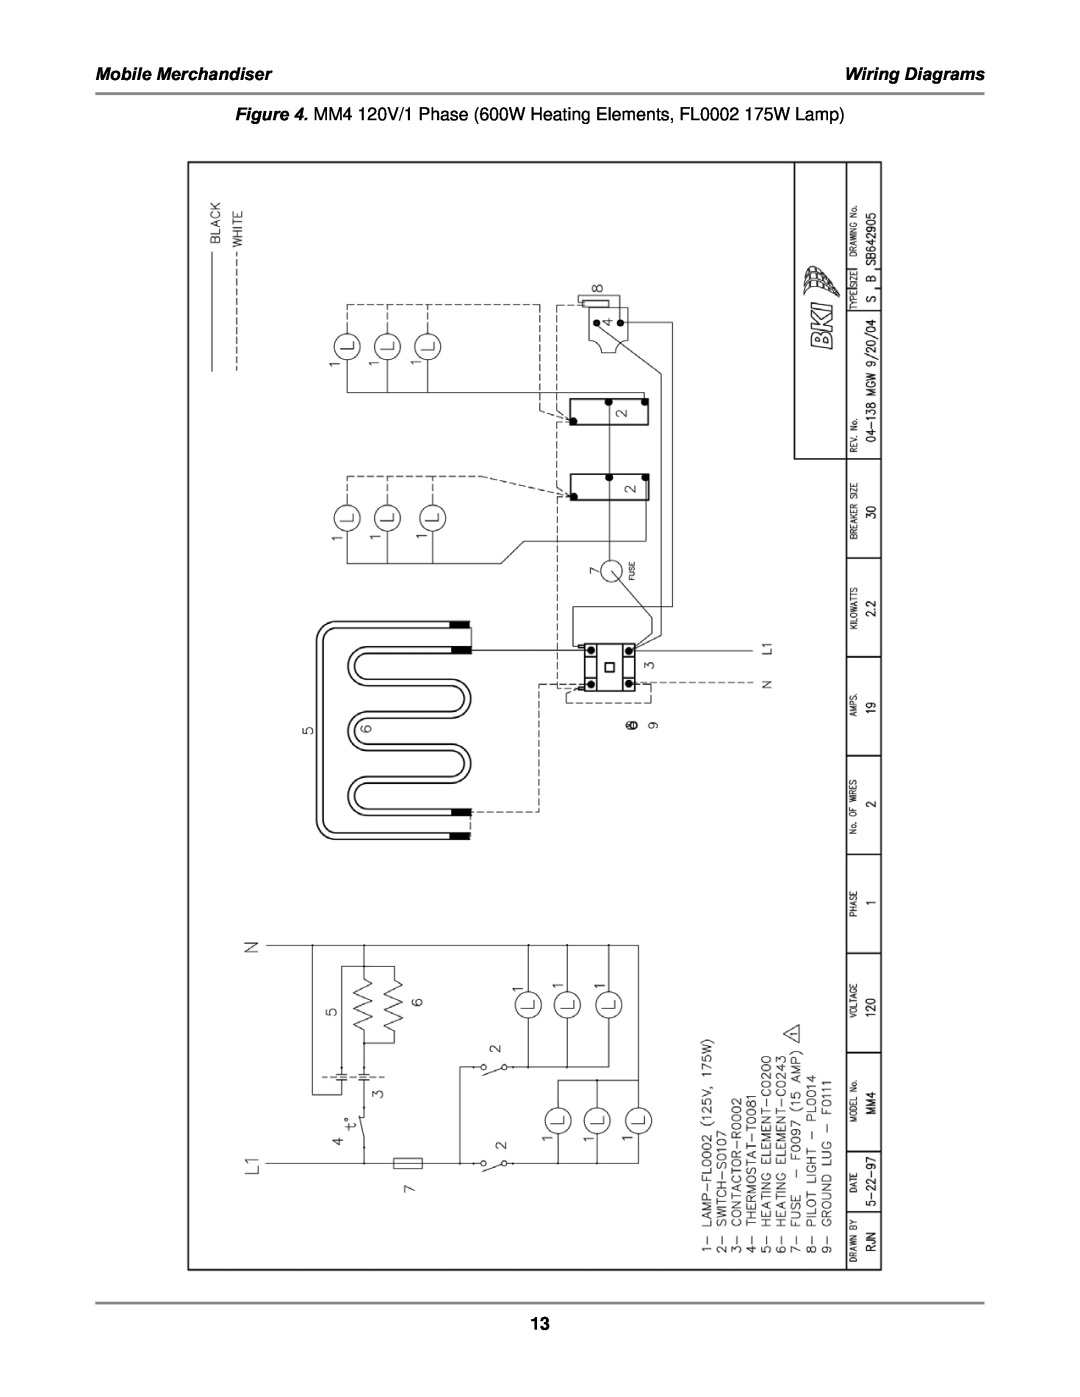 Bakers Pride Oven MM6, MM4 service manual Mobile Merchandiser, Wiring Diagrams 